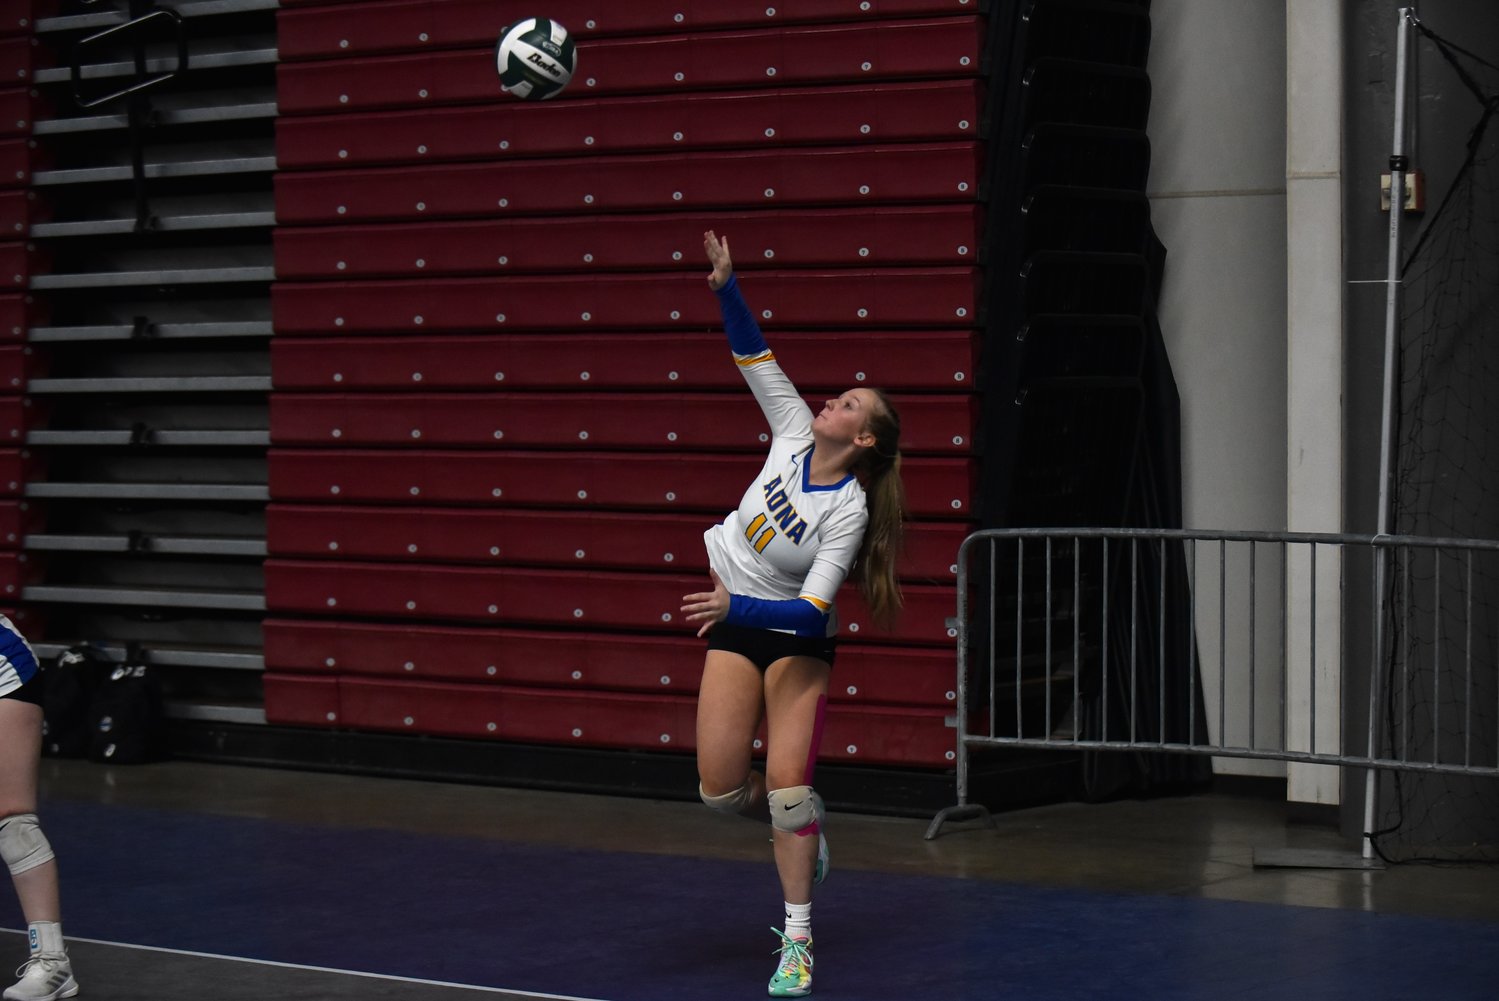 Kendall Humphrey serves the ball during Adna's loss to Colfax in the second round of the 2B state tournament on Nov. 10 in Yakima.